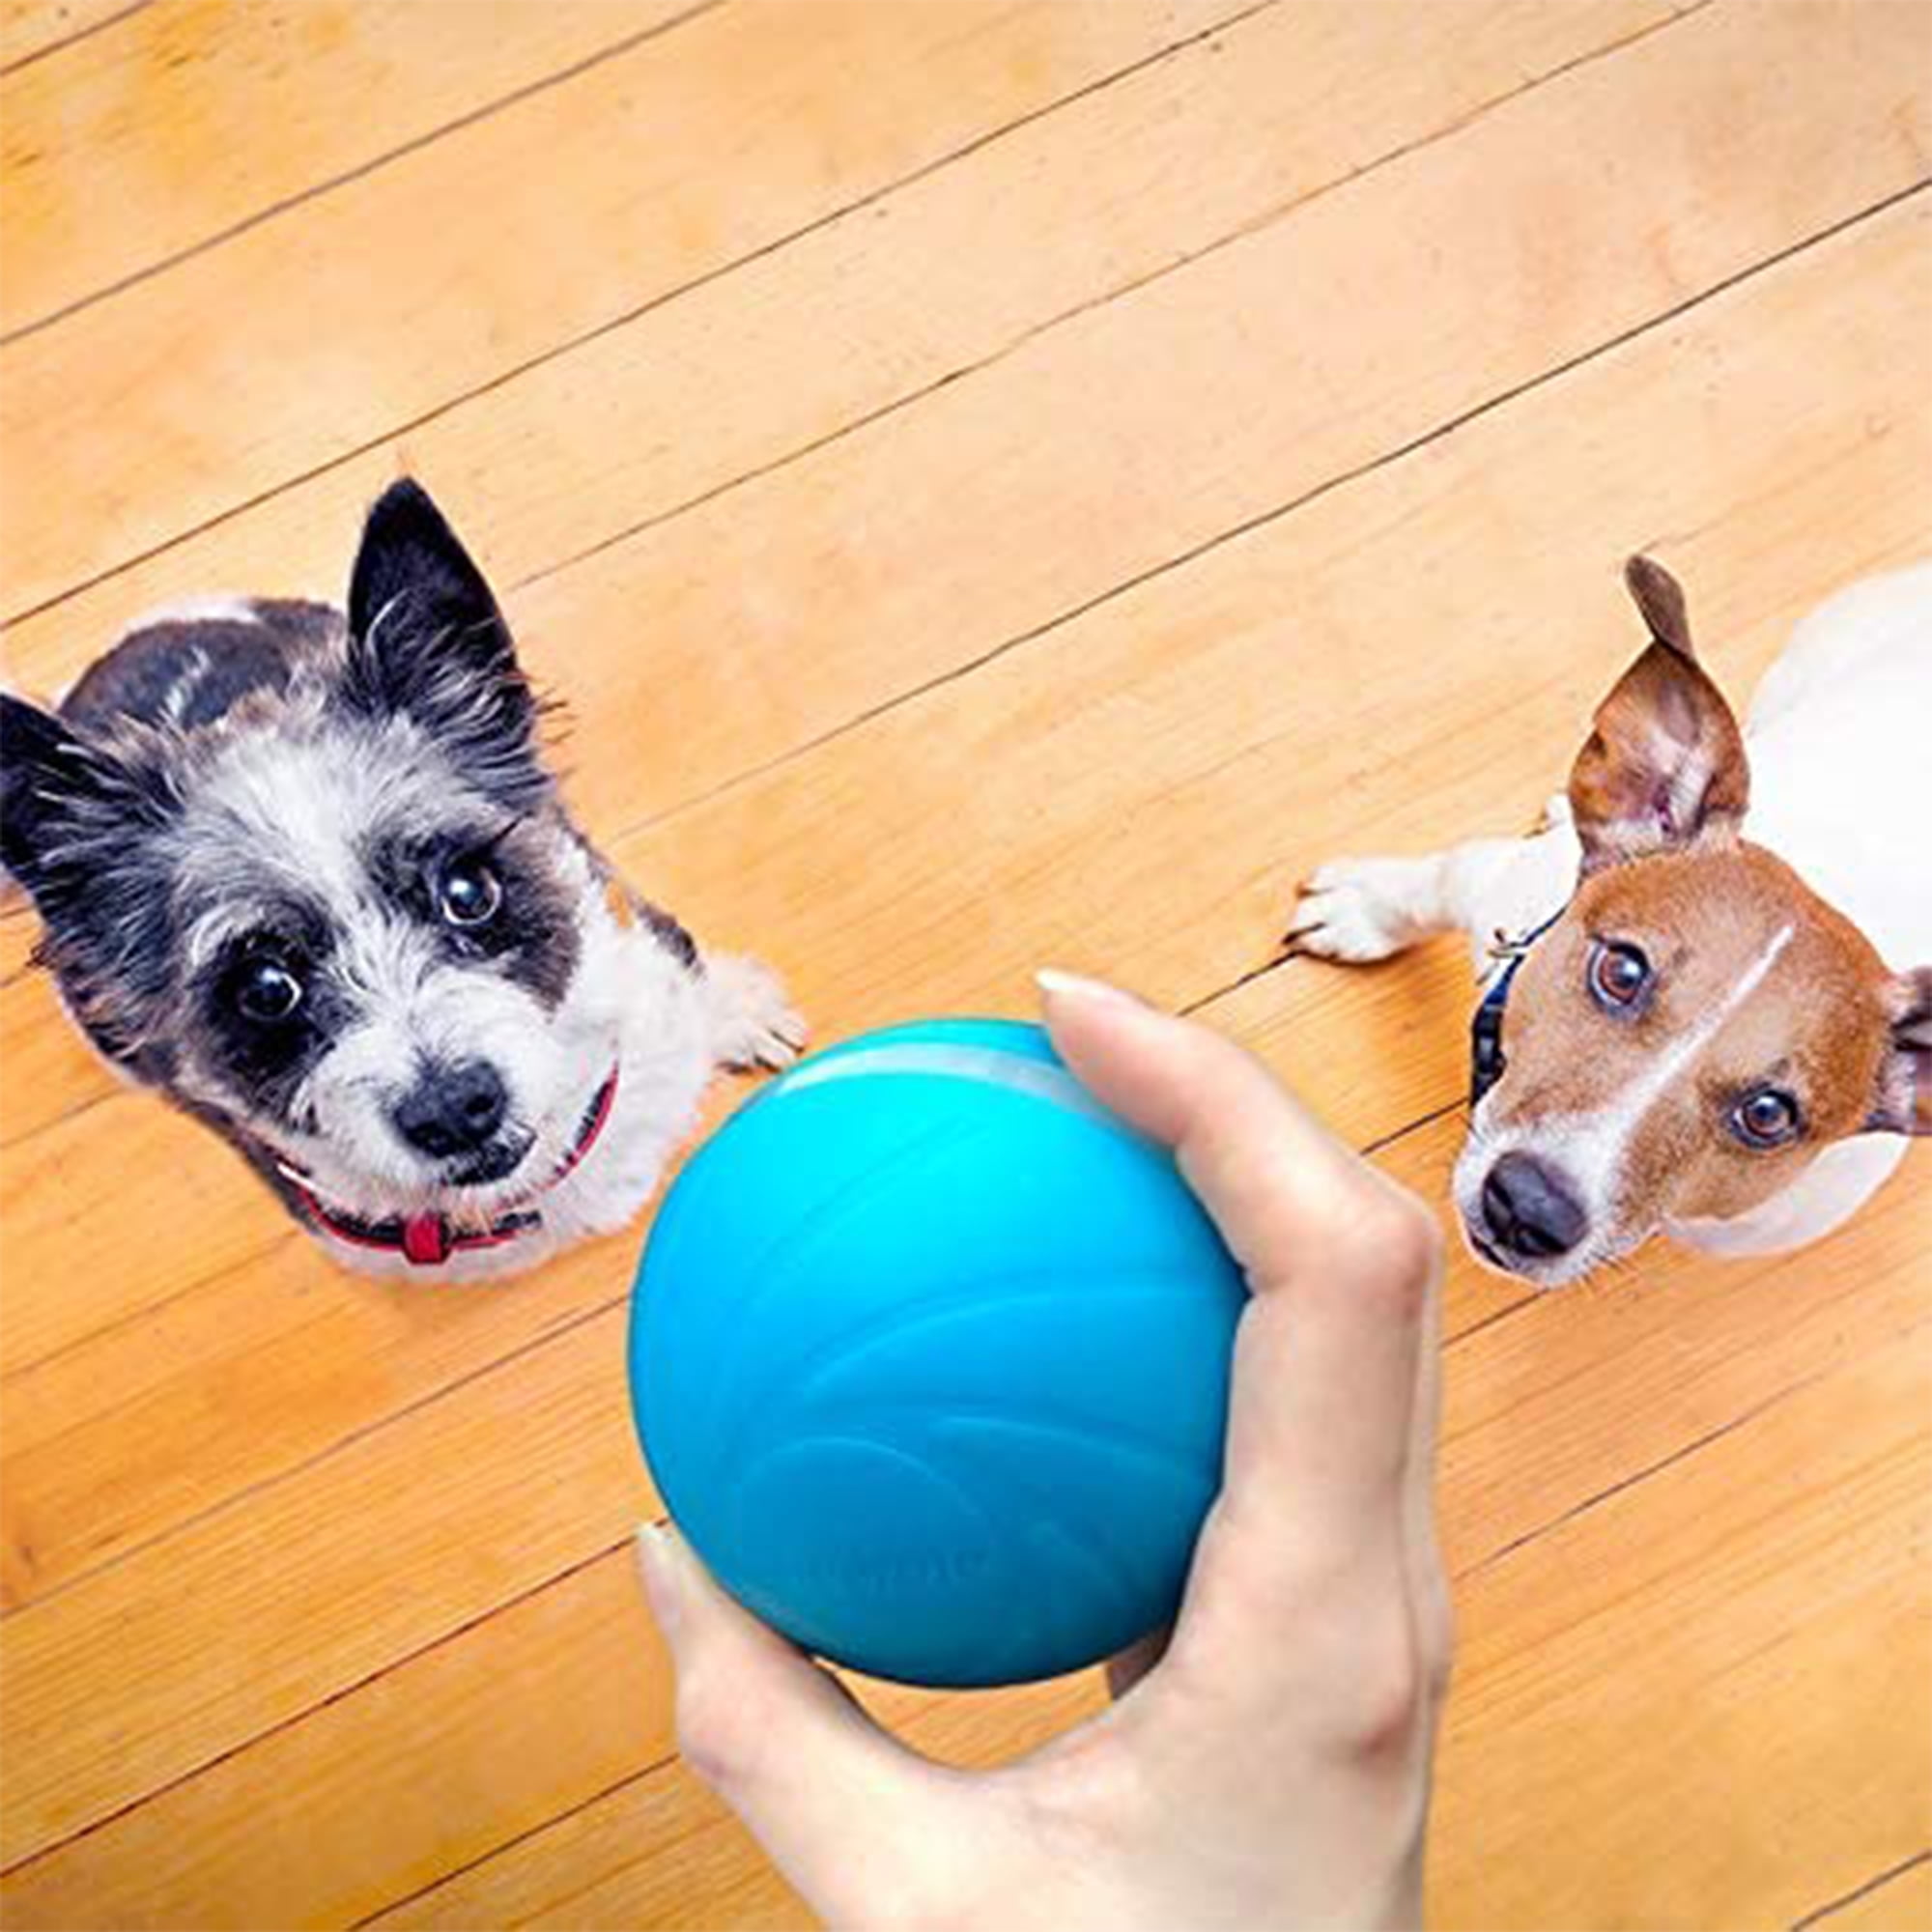 Cheerble Interactive Automatic Ball Smart Robotic Indoor Pet Toy Ball -  DVPets